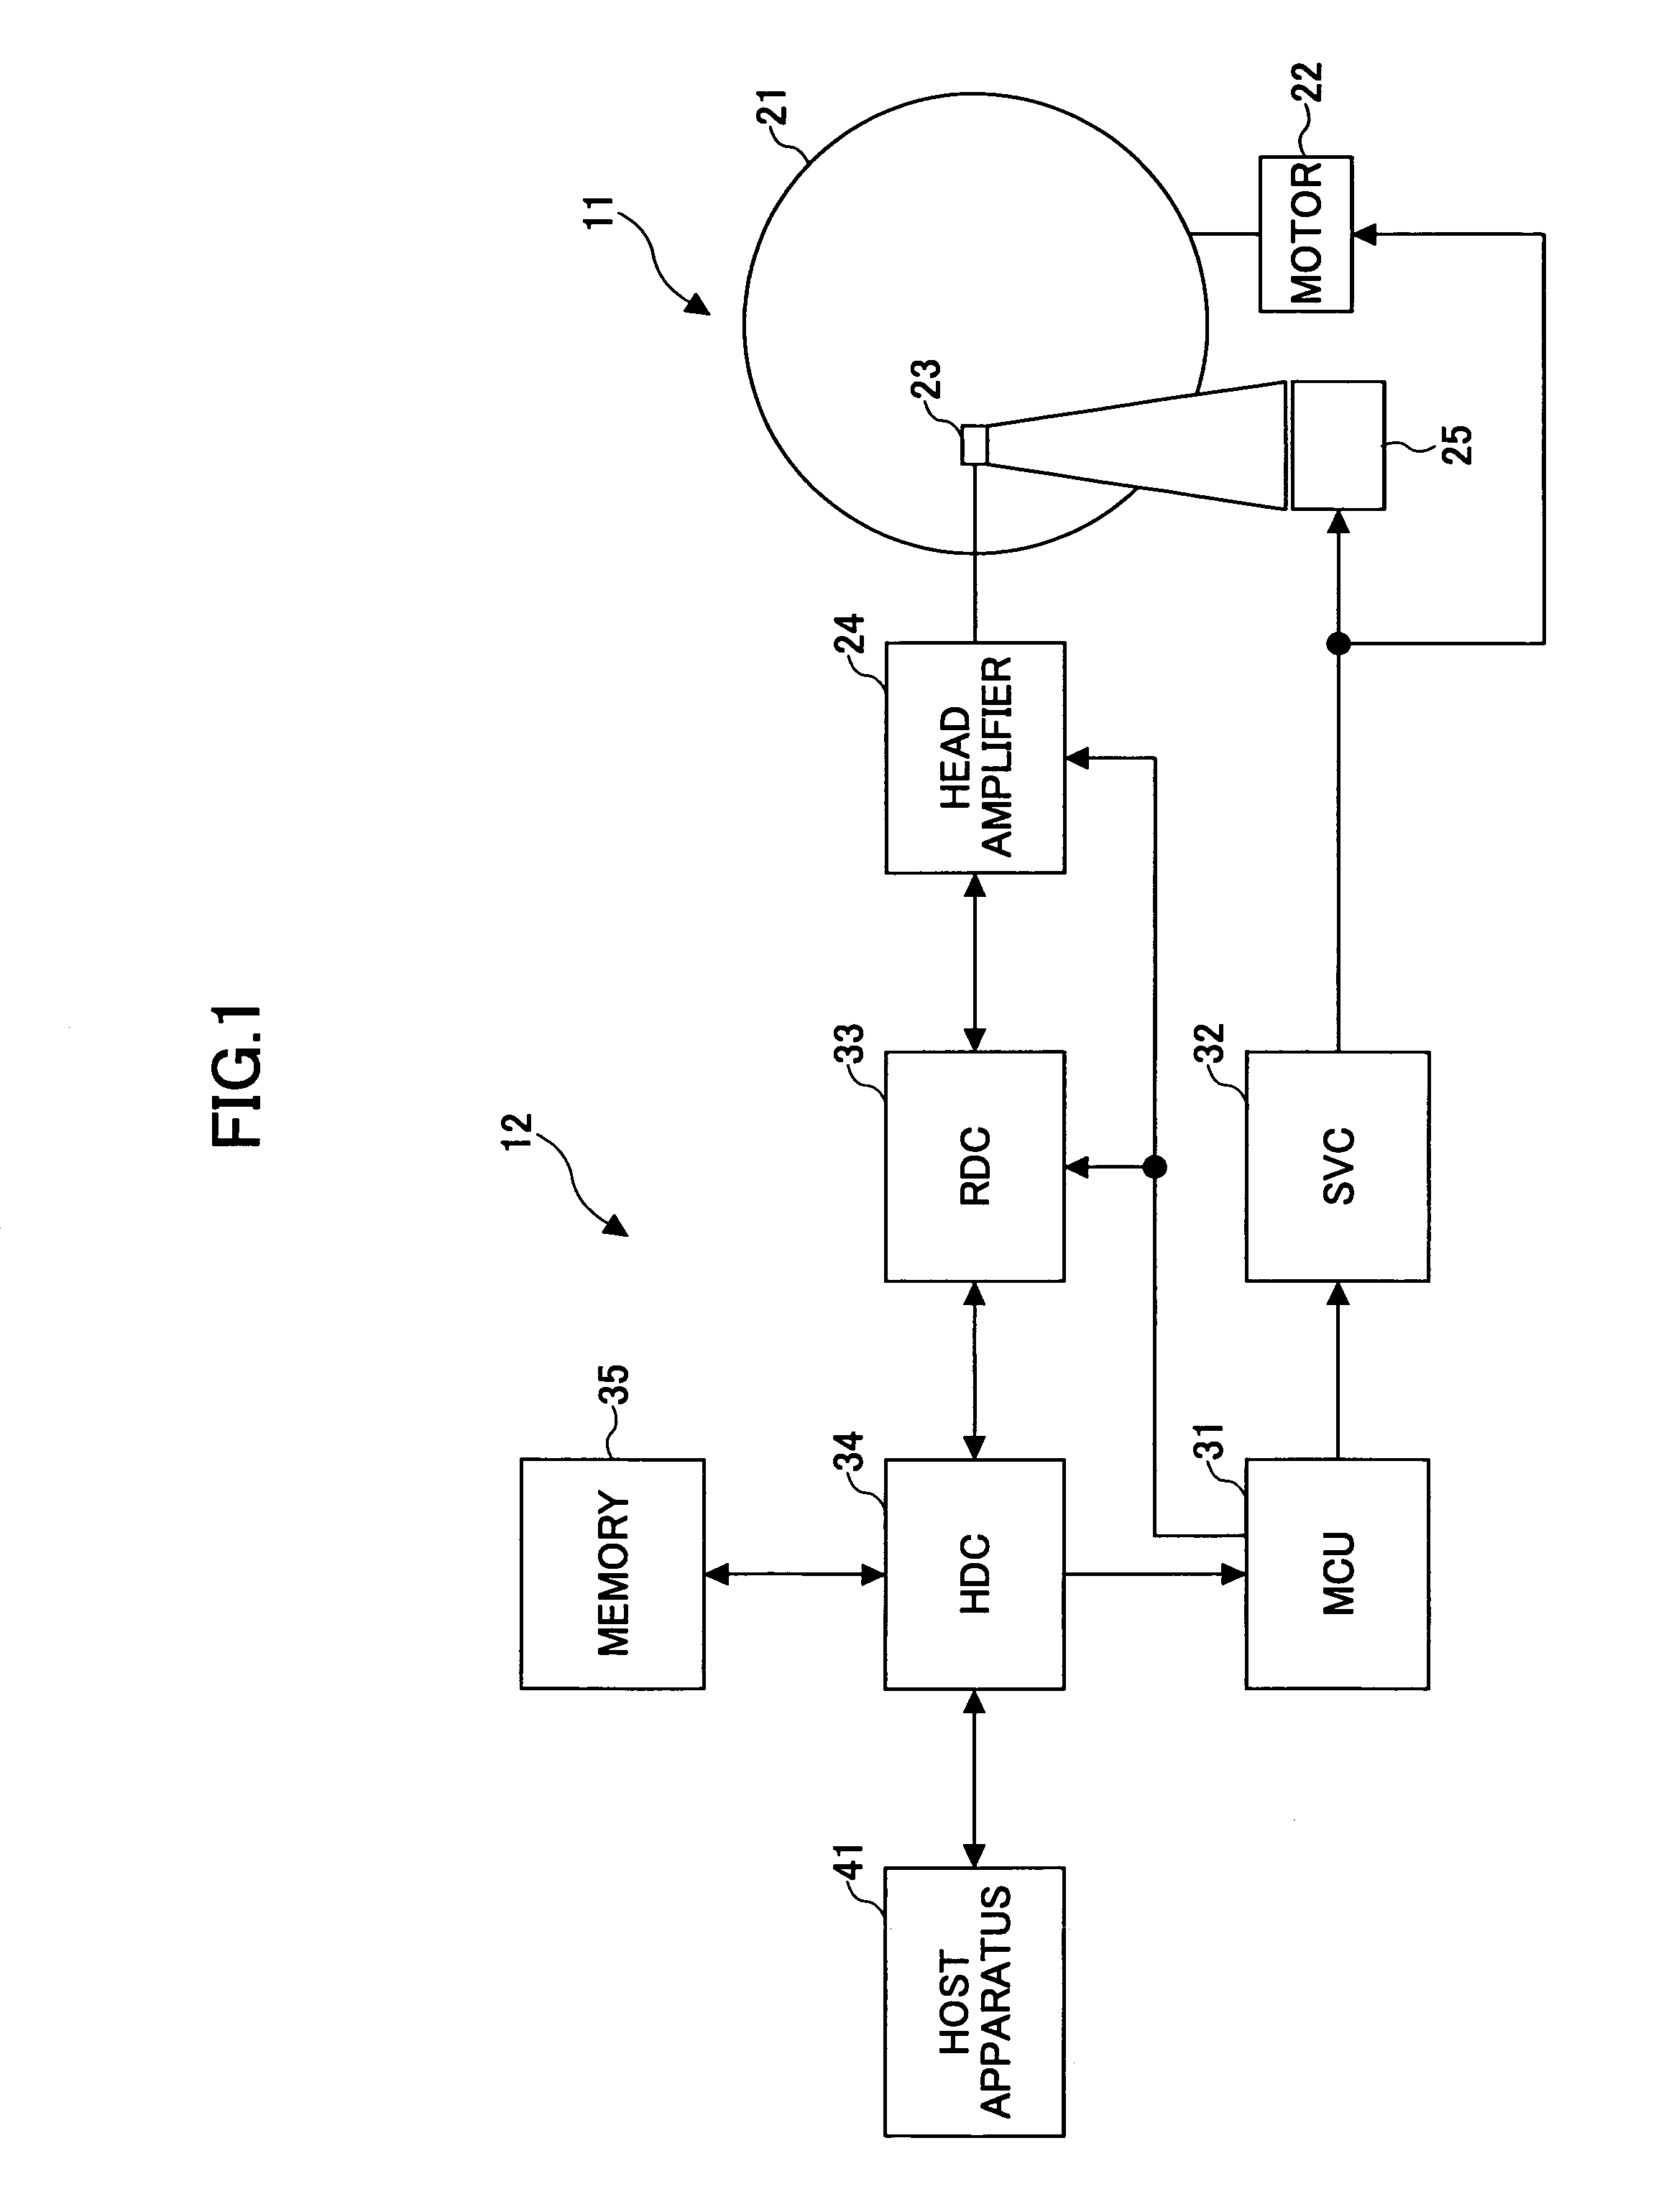 Magnetic disk apparatus suppressing adjacent track influence